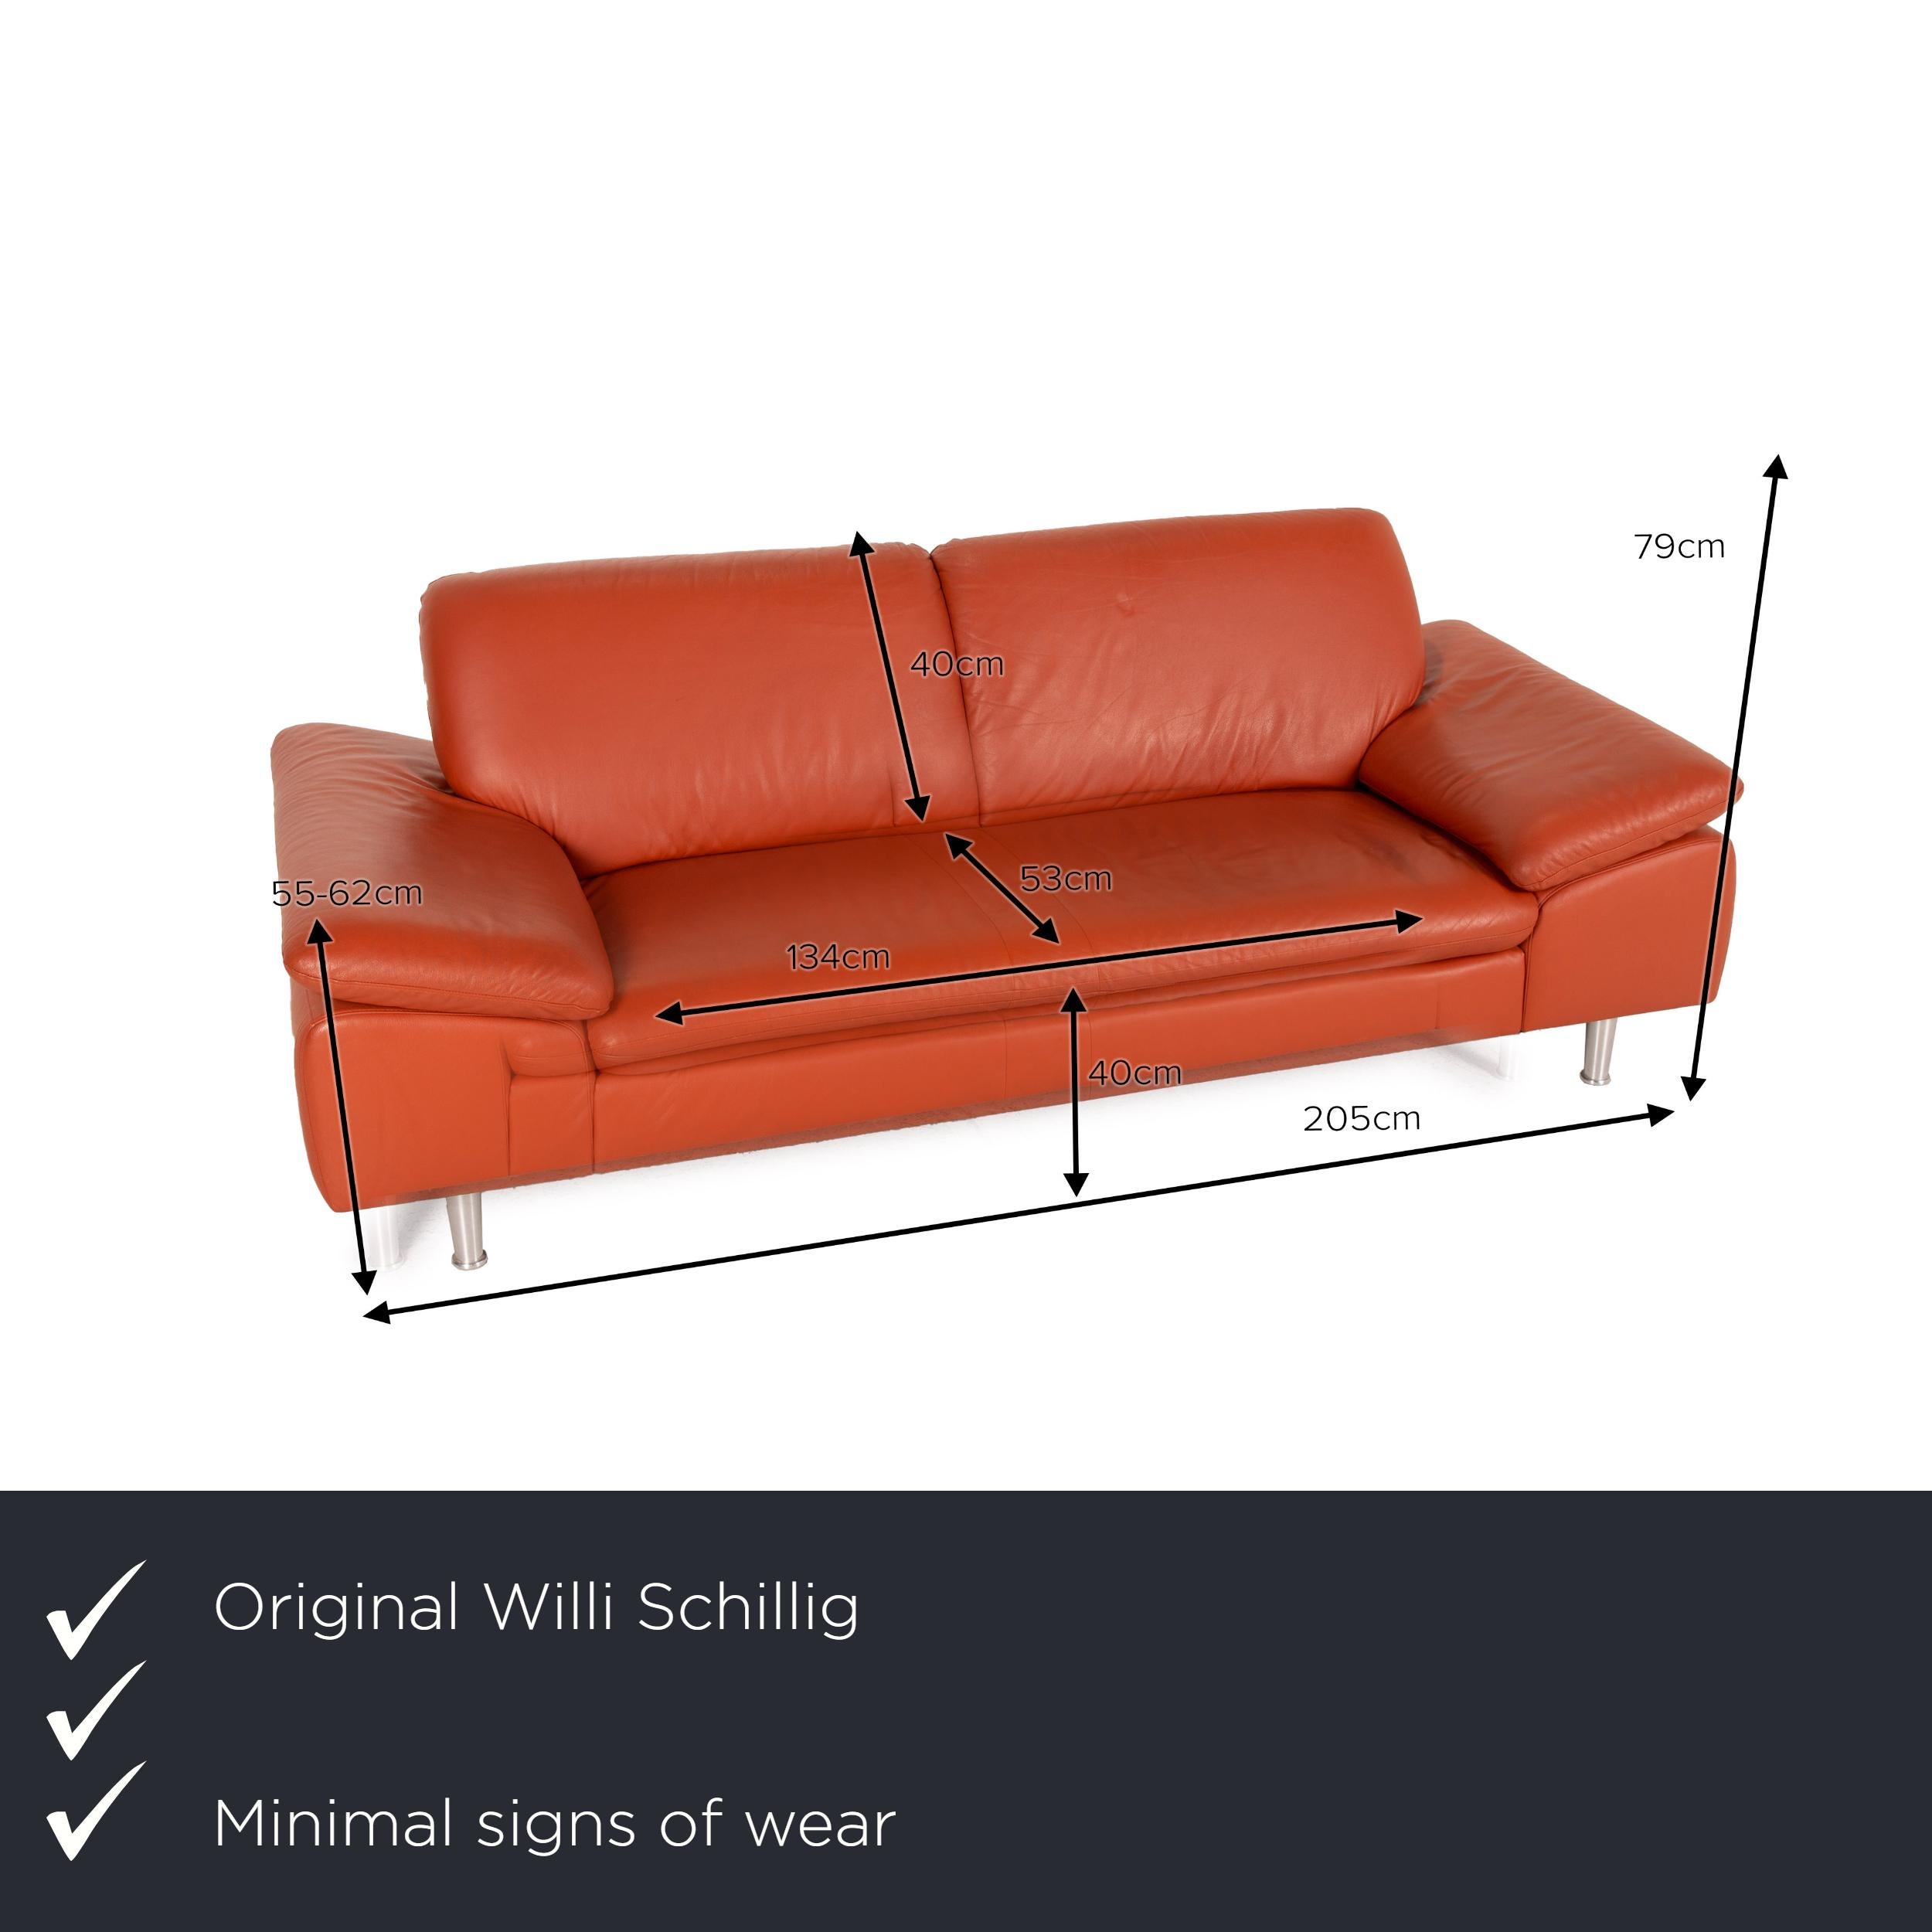 We present to you a Willi Schillig loop leather sofa orange three-seater couch.

 

 Product measurements in centimeters:
 

 depth: 90
 width: 215
 height: 79
 seat height: 40
 rest height: 55
 seat depth: 53
 seat width: 134
 back